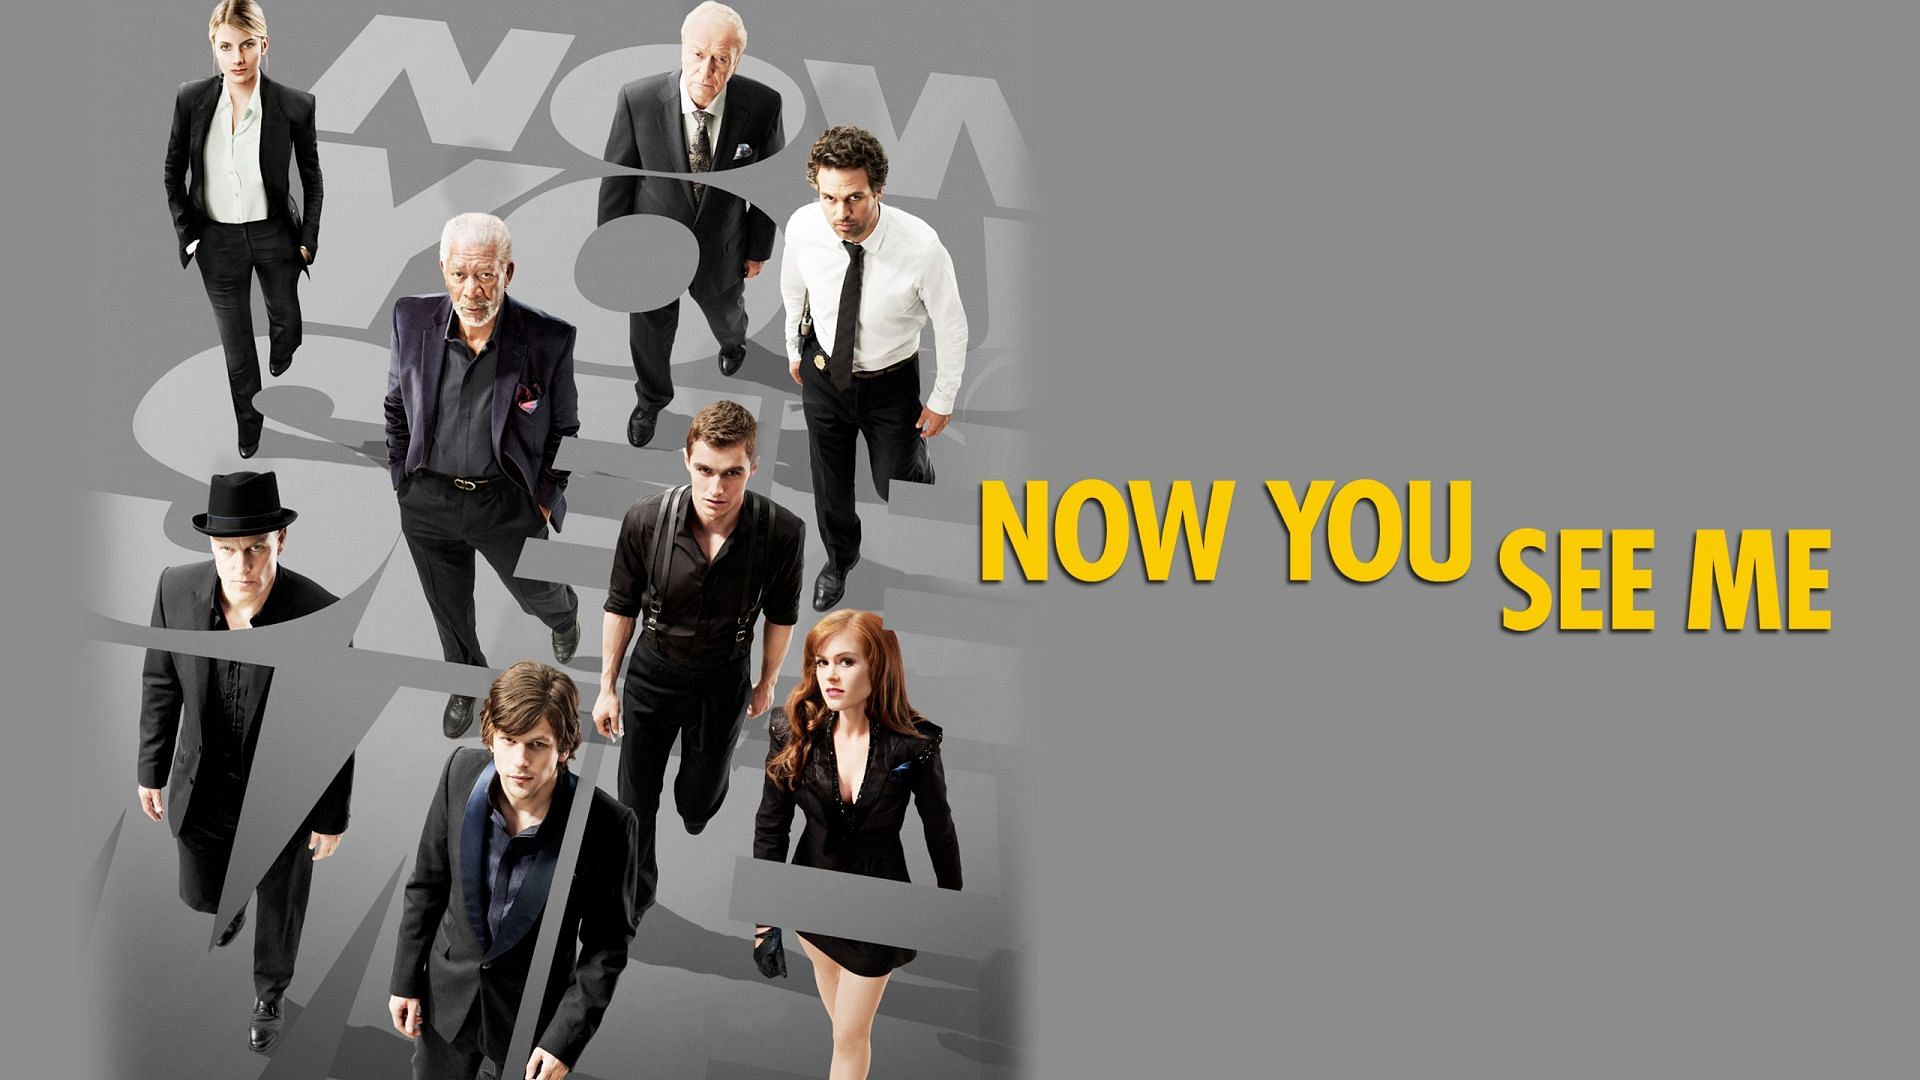 Now You See Me (Image via Lionsgate)